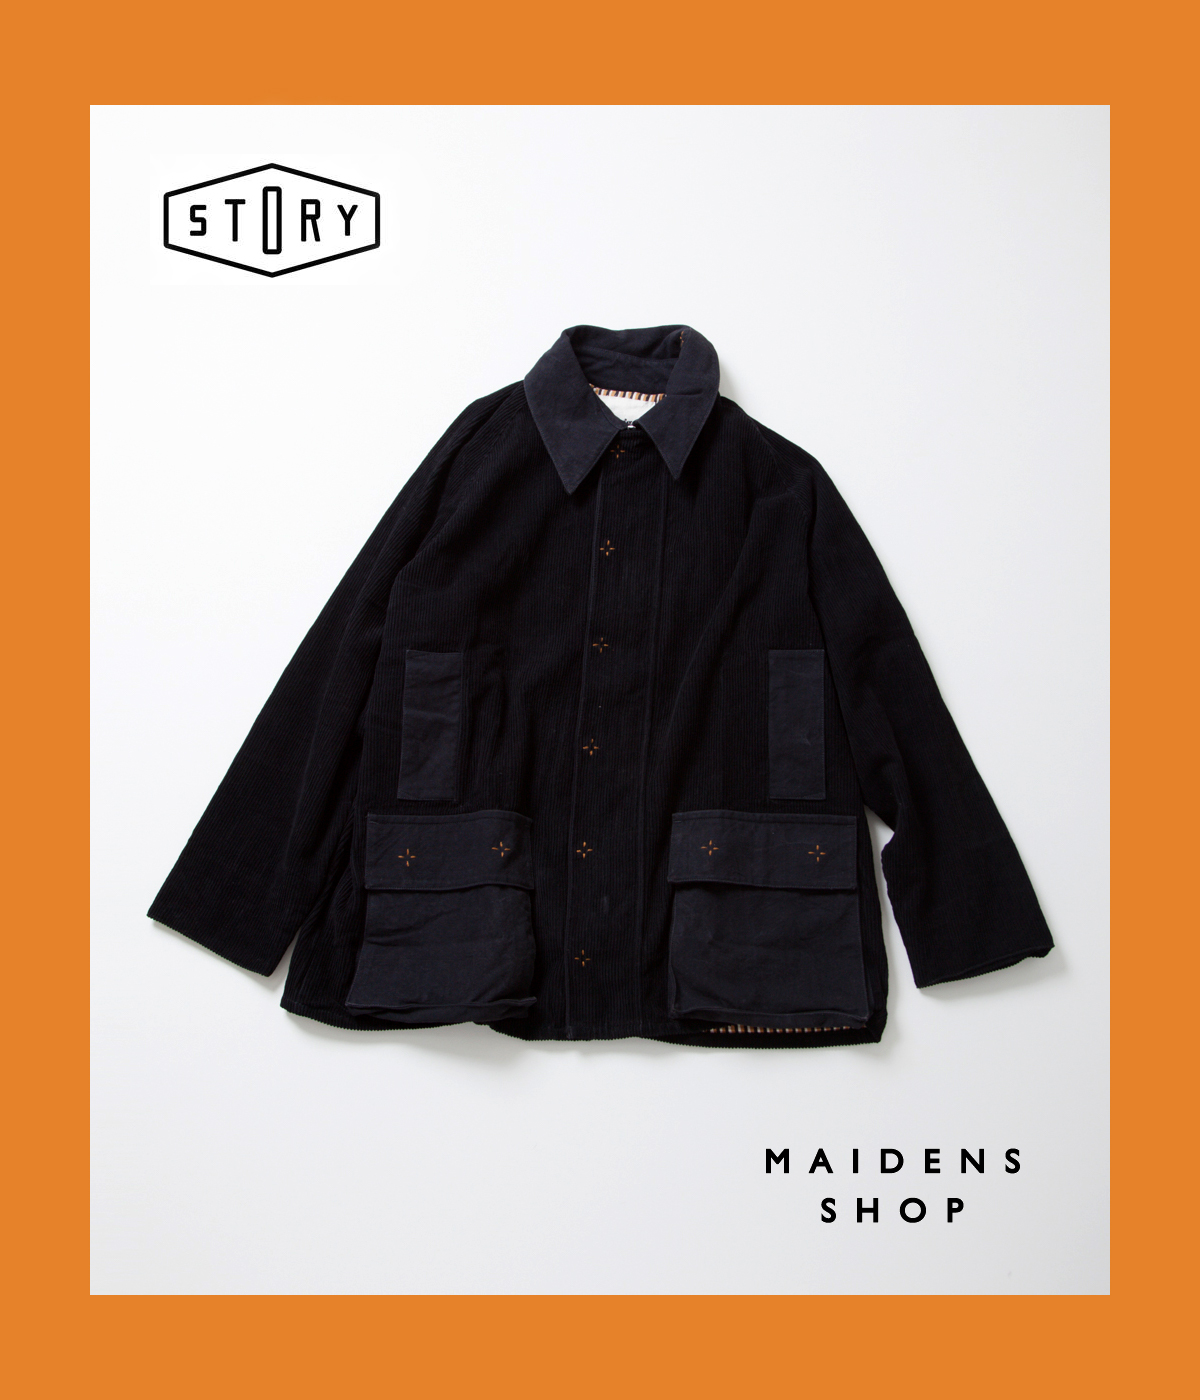 EXCLUSIVE COLLECTION “STORY mfg. for MAIDENS SHOP / IRON BLACK ...